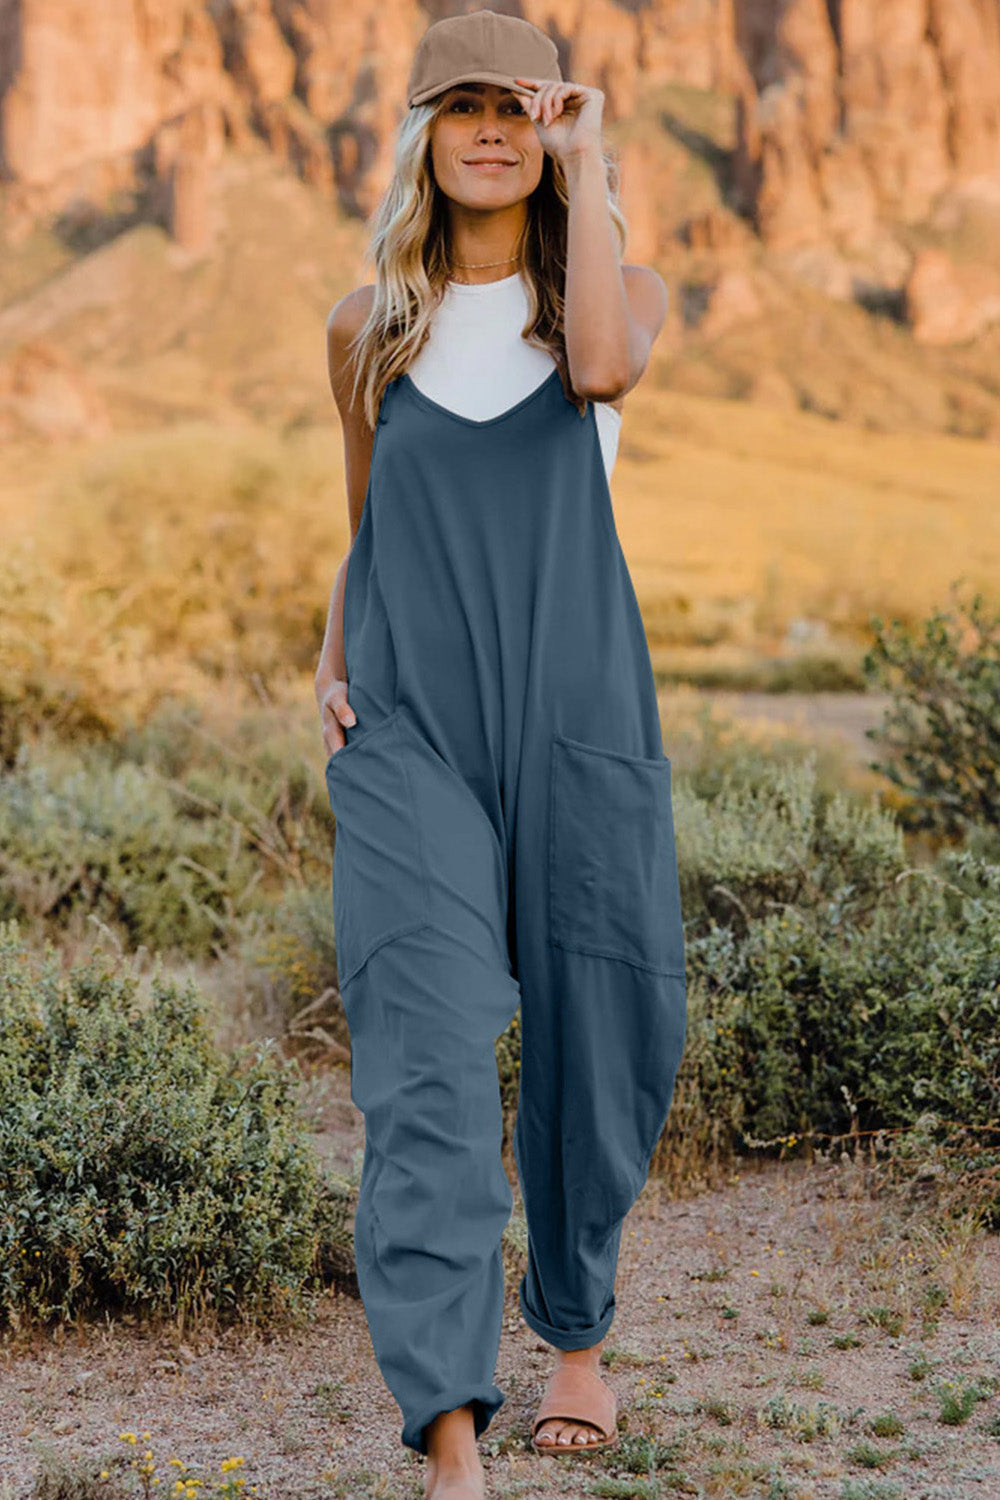 Double Take  V-Neck Sleeveless Jumpsuit with Pocket Print on any thing USA/STOD clothes